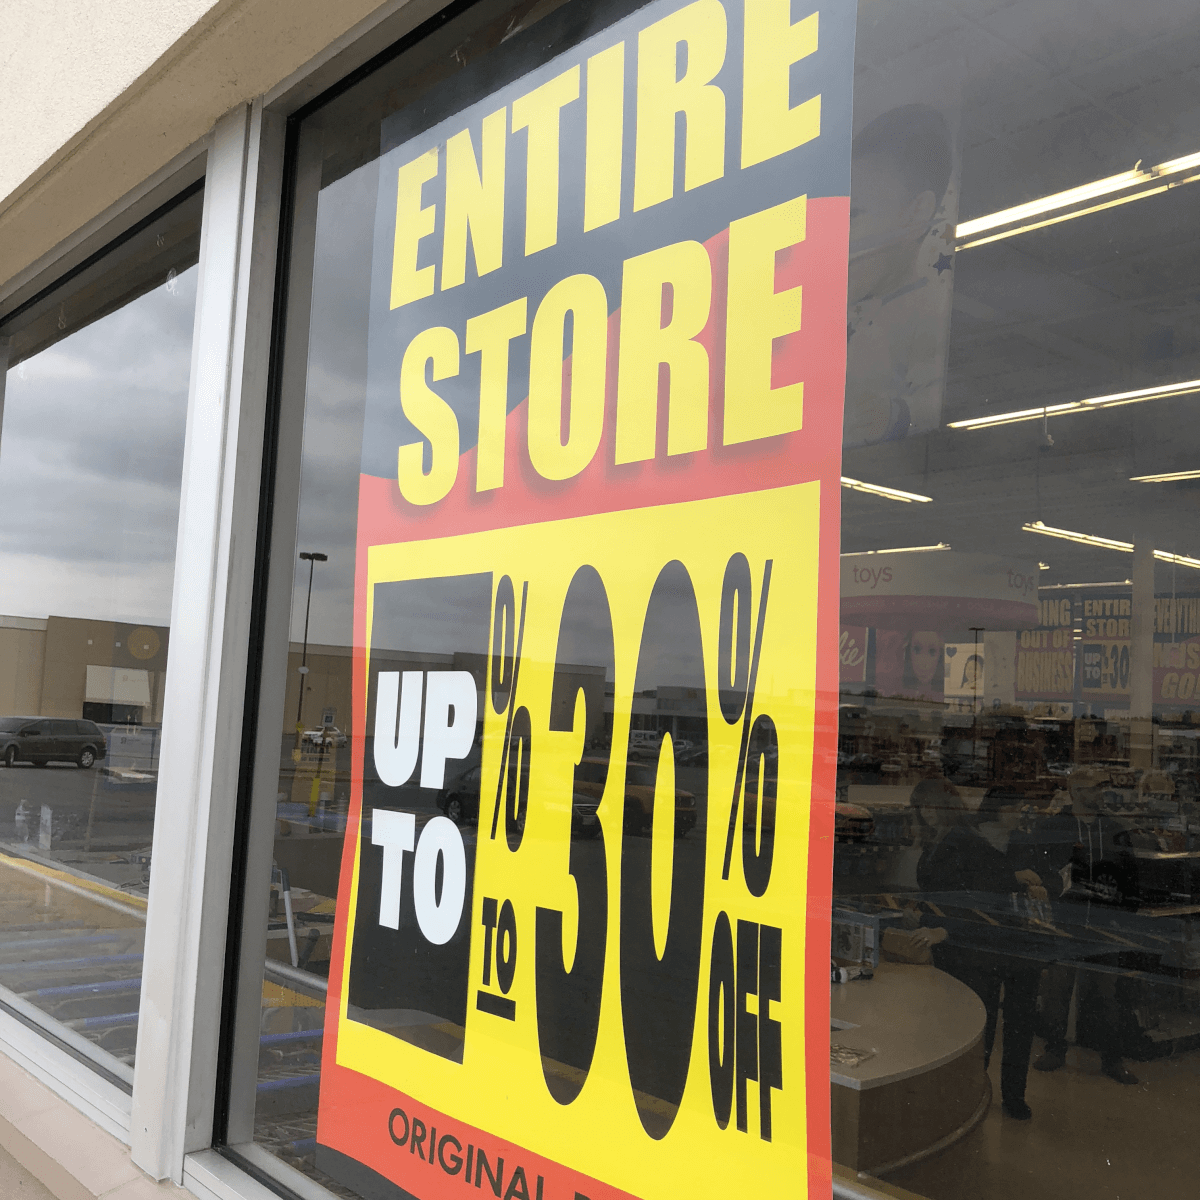 Toys R Us has not fully committed to going out of business - Bent Corner